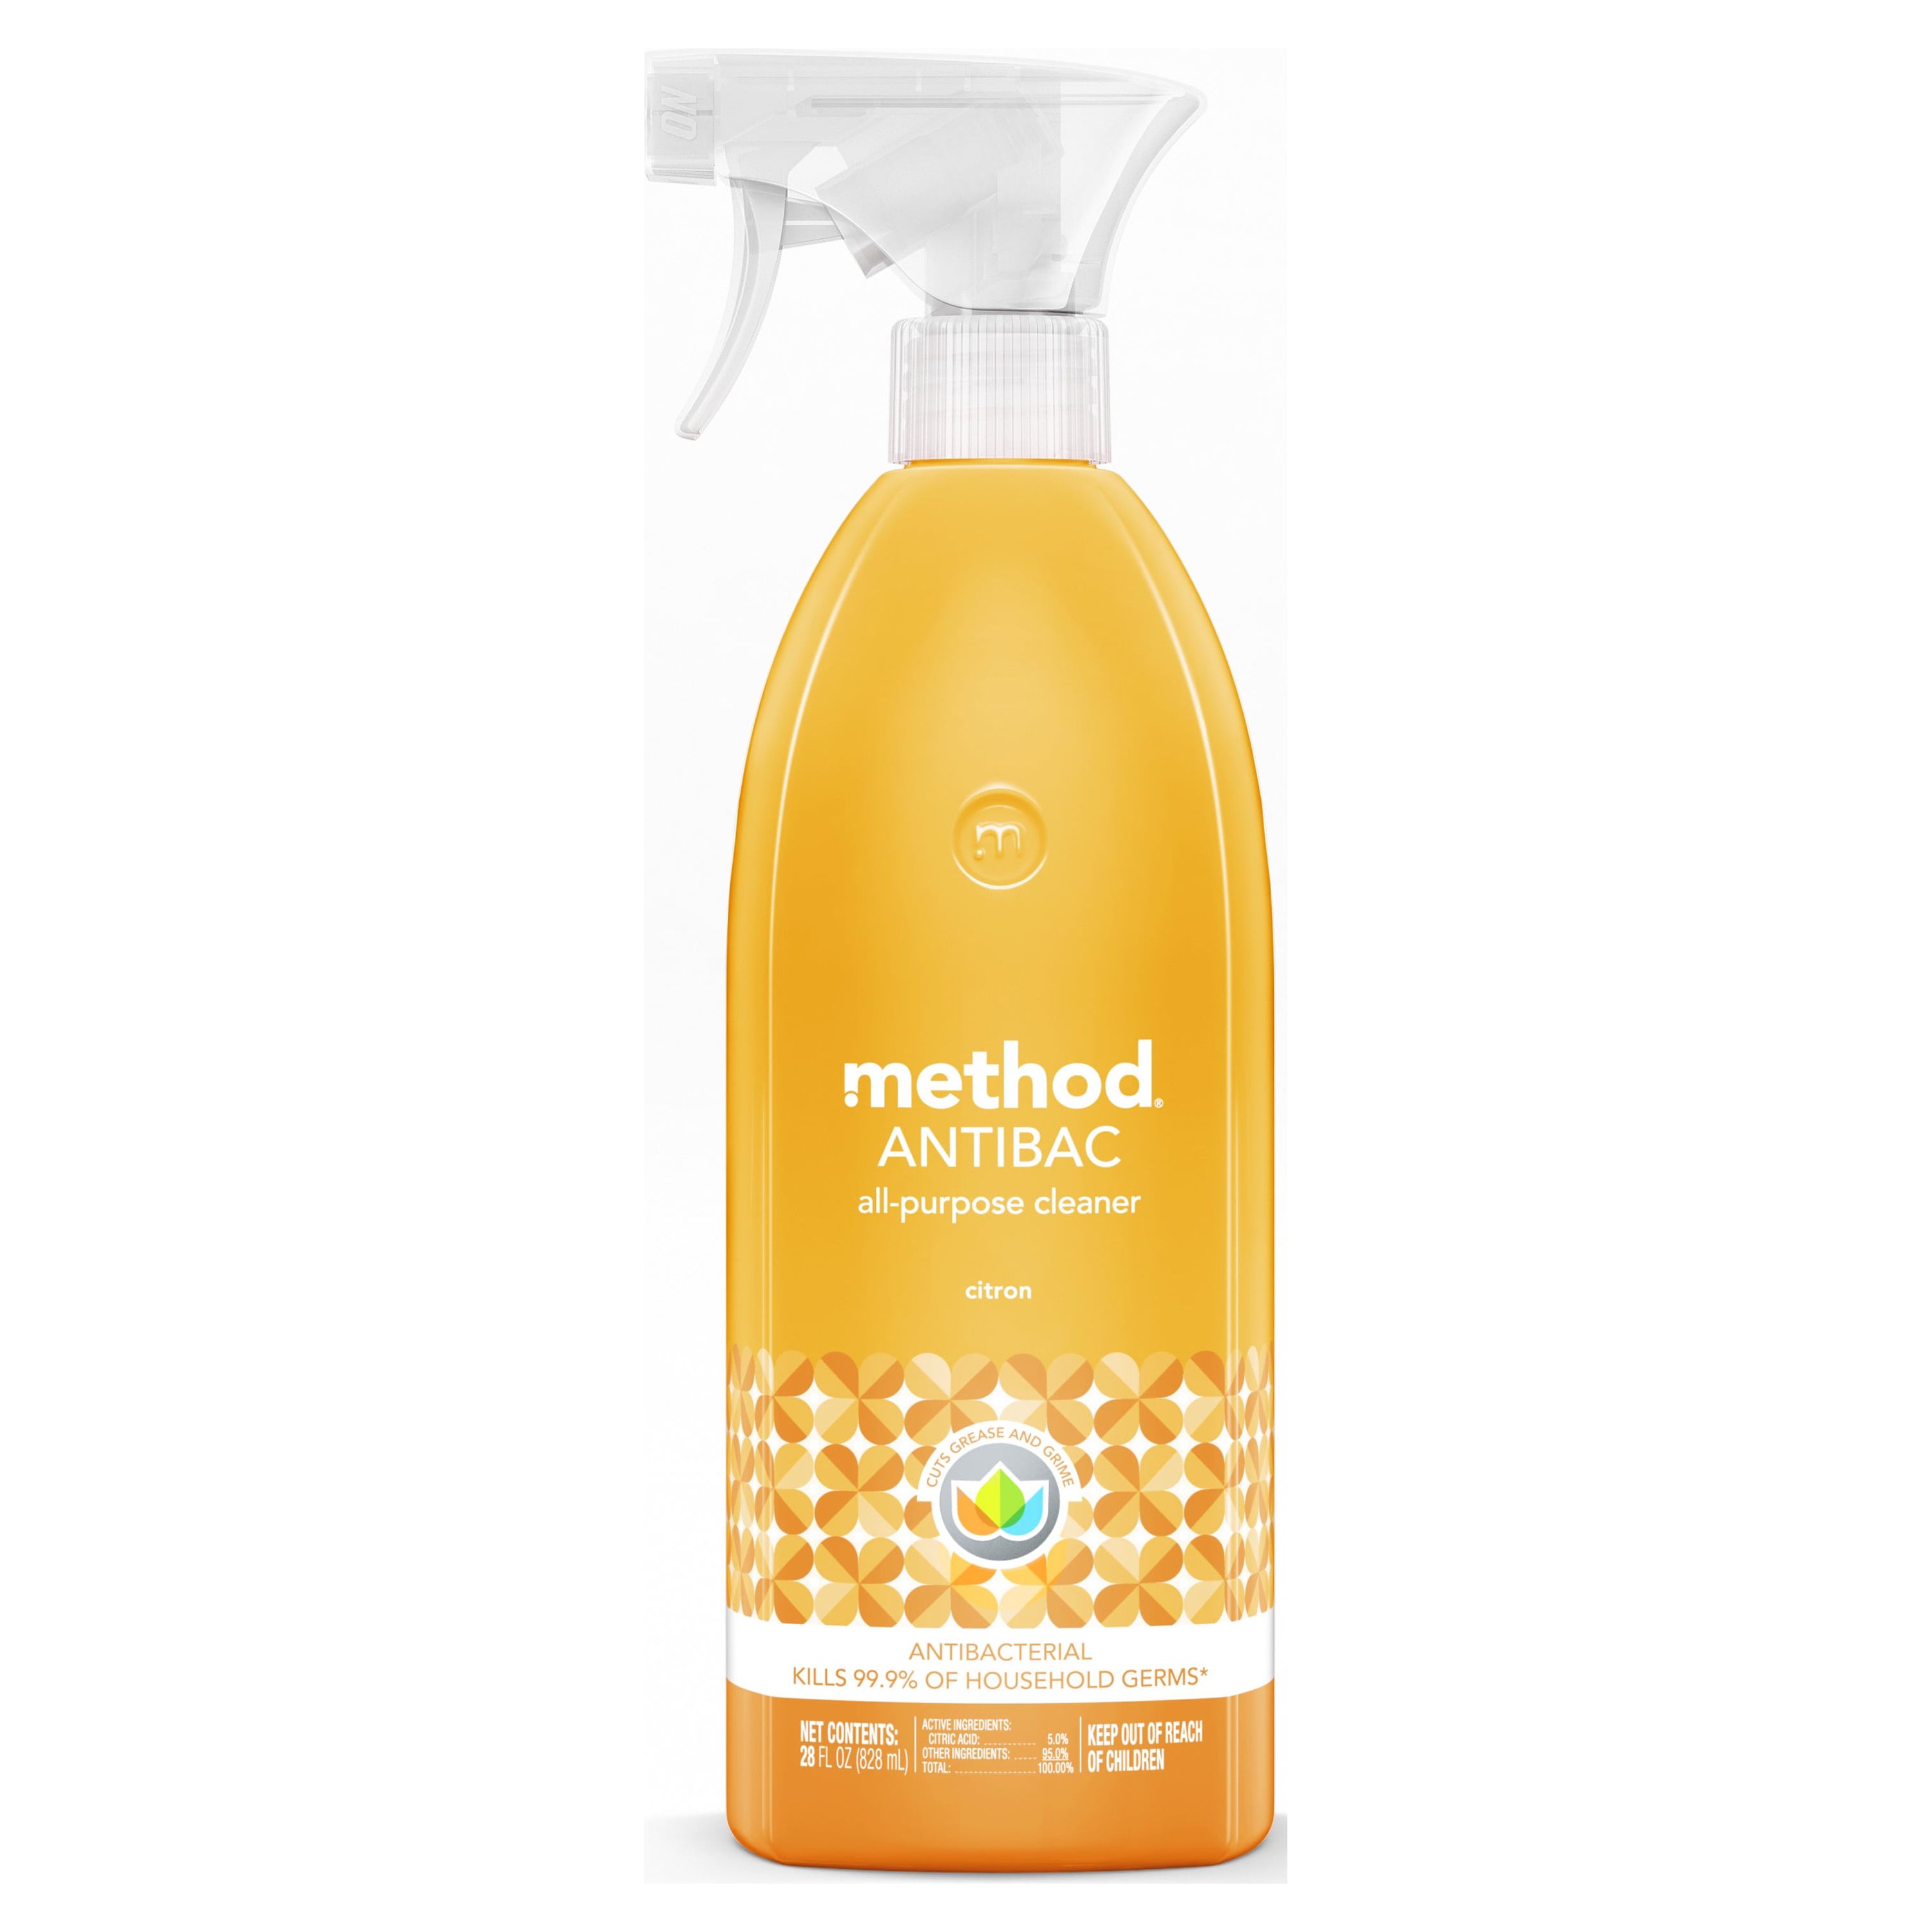 Method Antibacterial All-Purpose Cleaner, Citron, 28 Ounce Spray Bottle - image 1 of 6